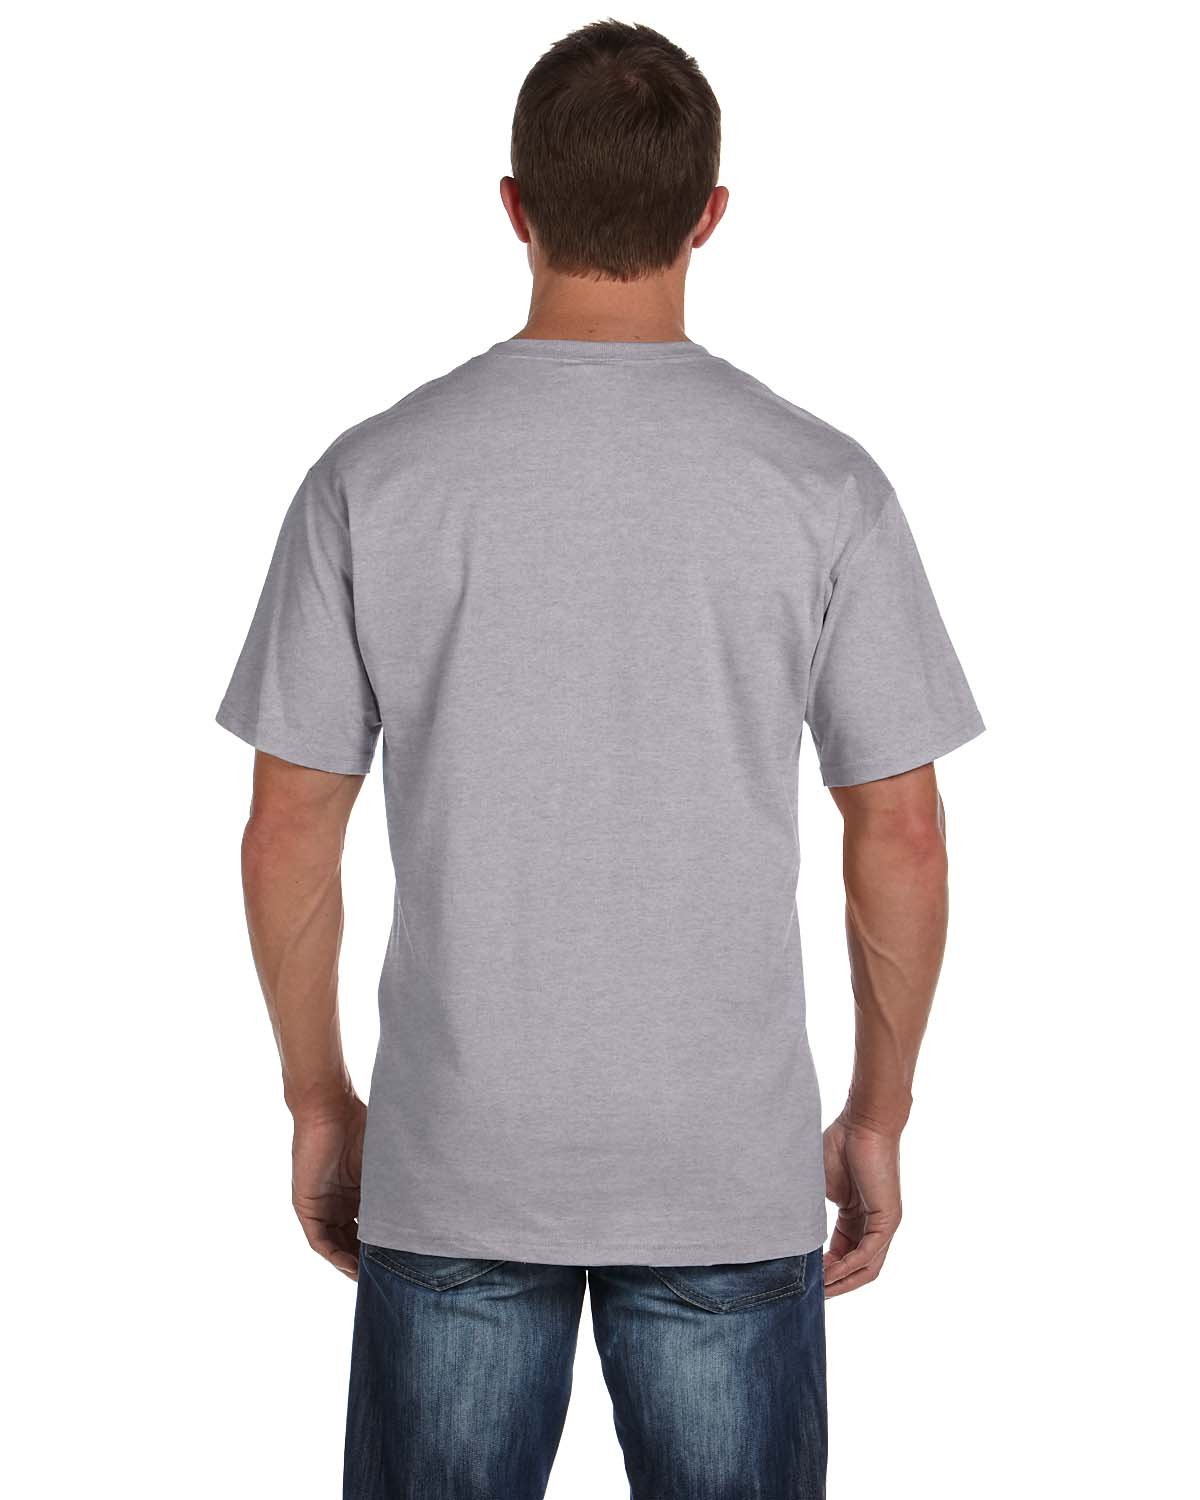 Fruit of the Loom Men's Pocket Crew Neck T-Shirt - XX-Large - Heather Gray (Pack of 4)